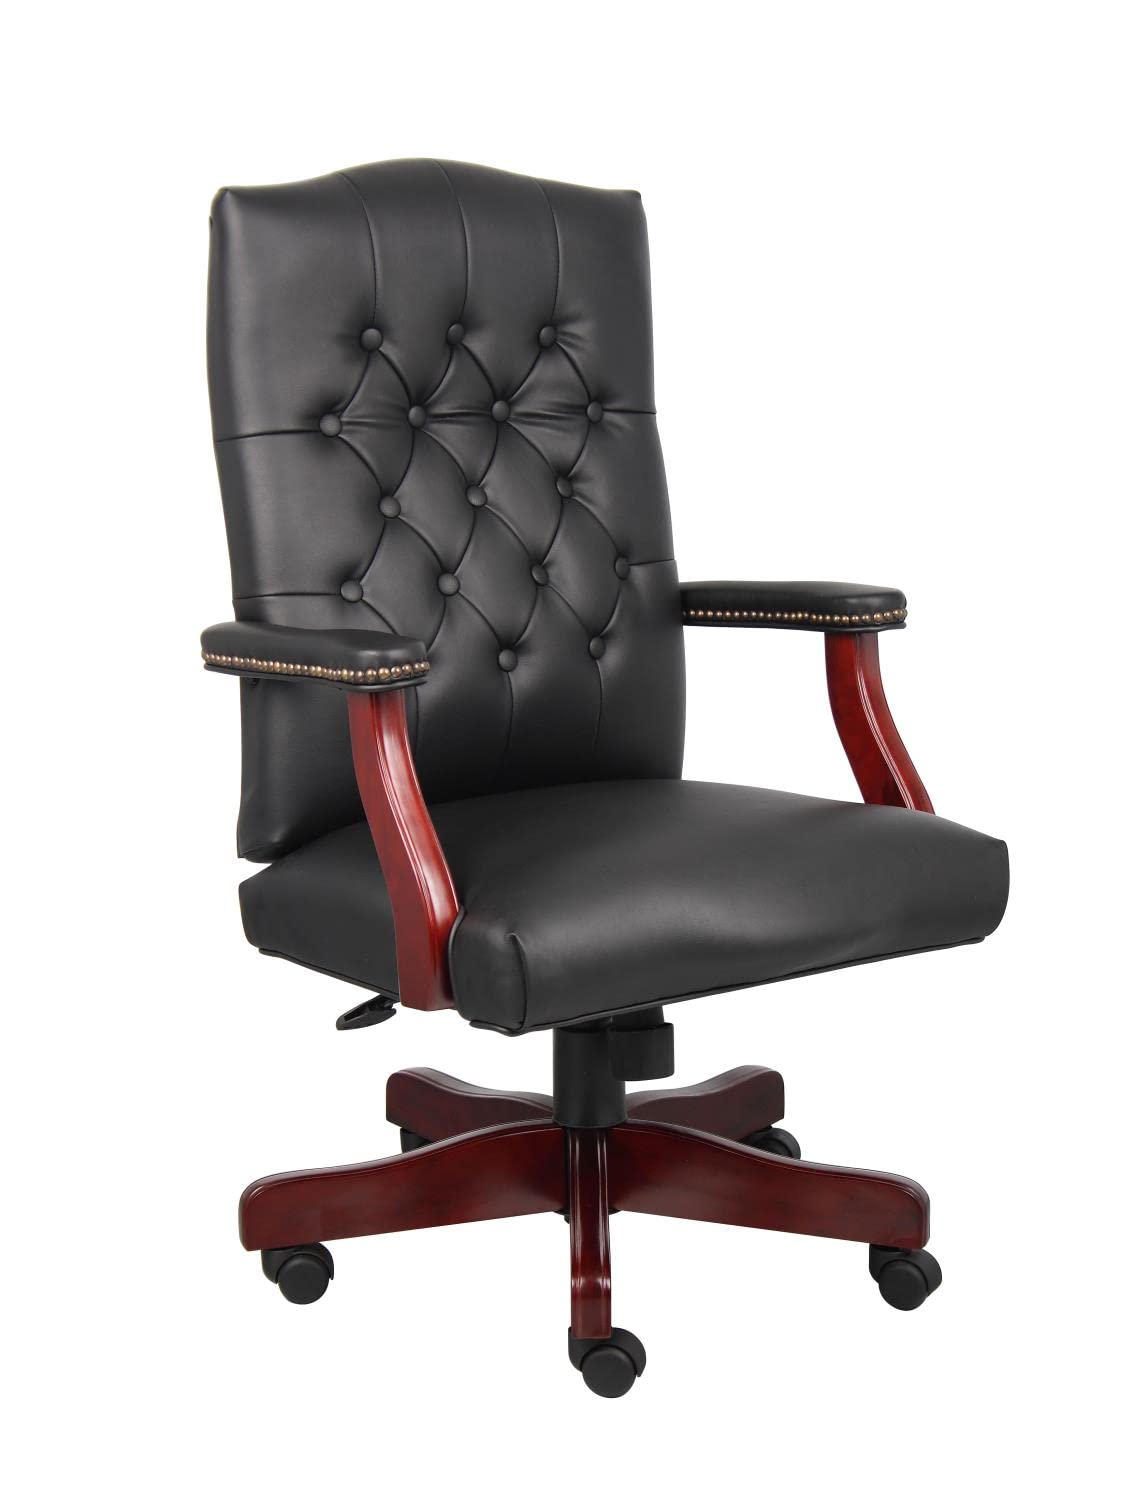 Boss Office Products Office Products Klassischer Executive-Caressoft-Stuhl mit Mahagoni-Finish in Schwarz